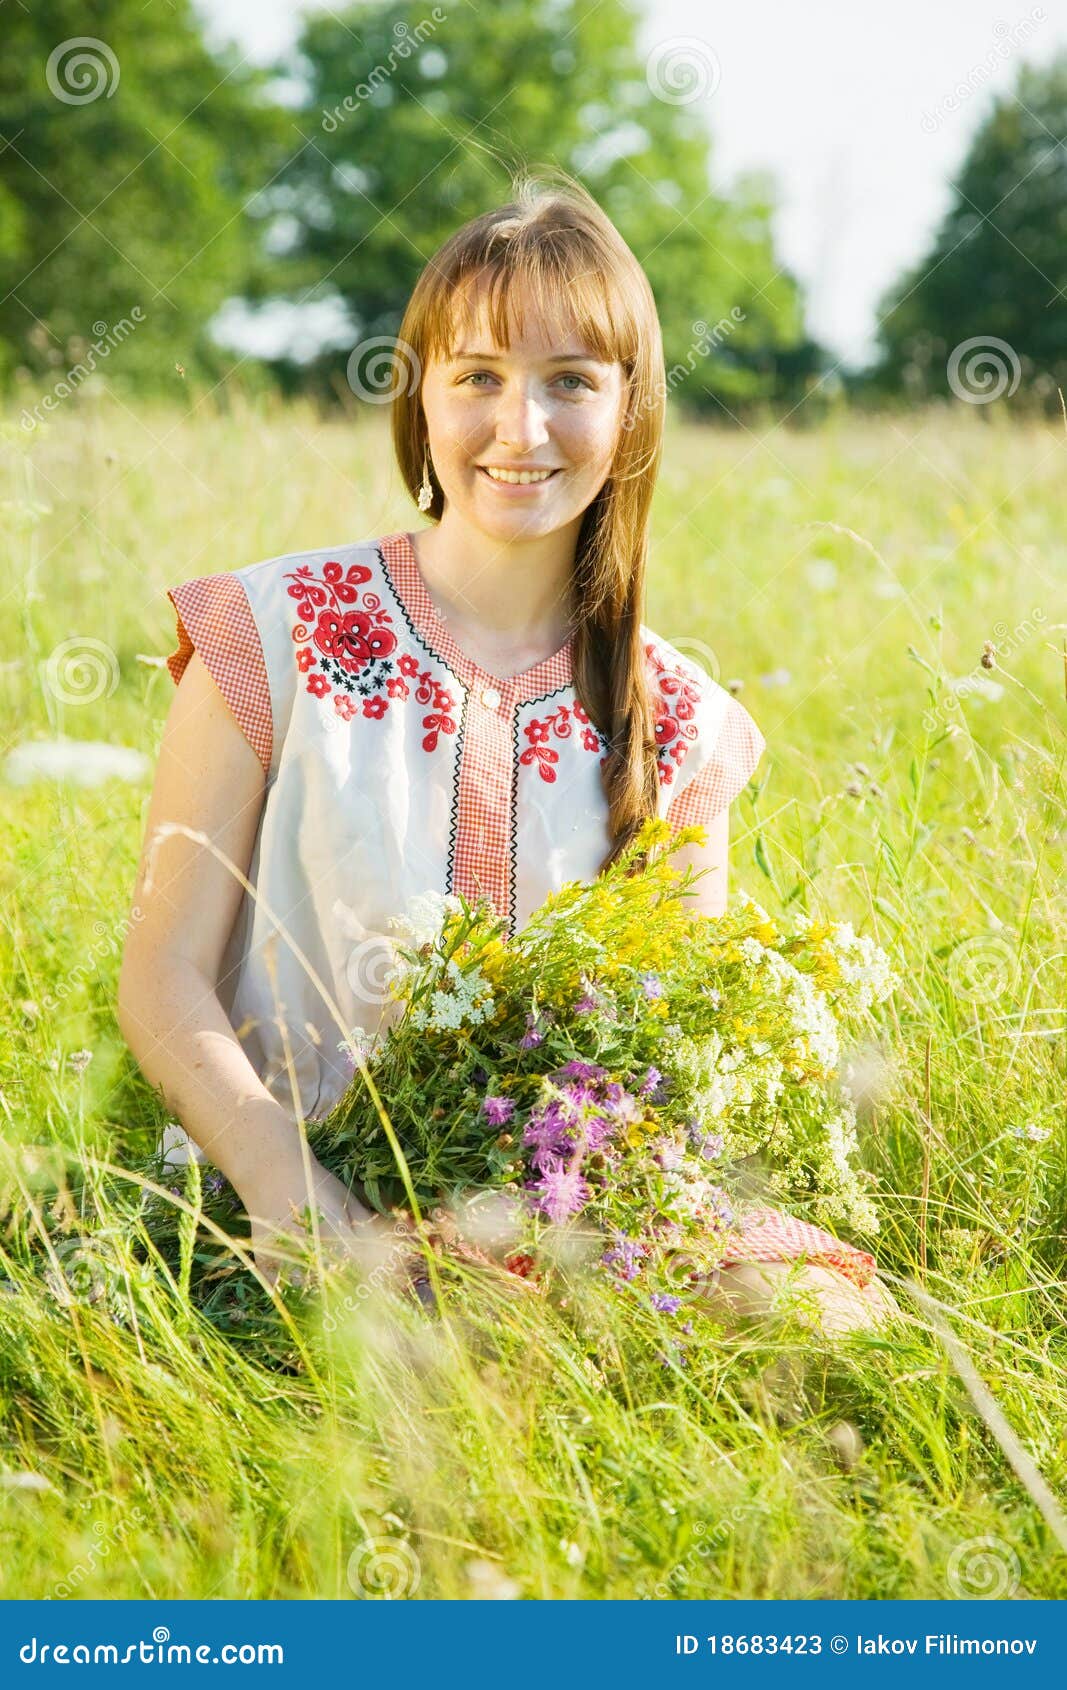 Girl in Traditional Clothes Stock Image - Image of russia, leisure ...